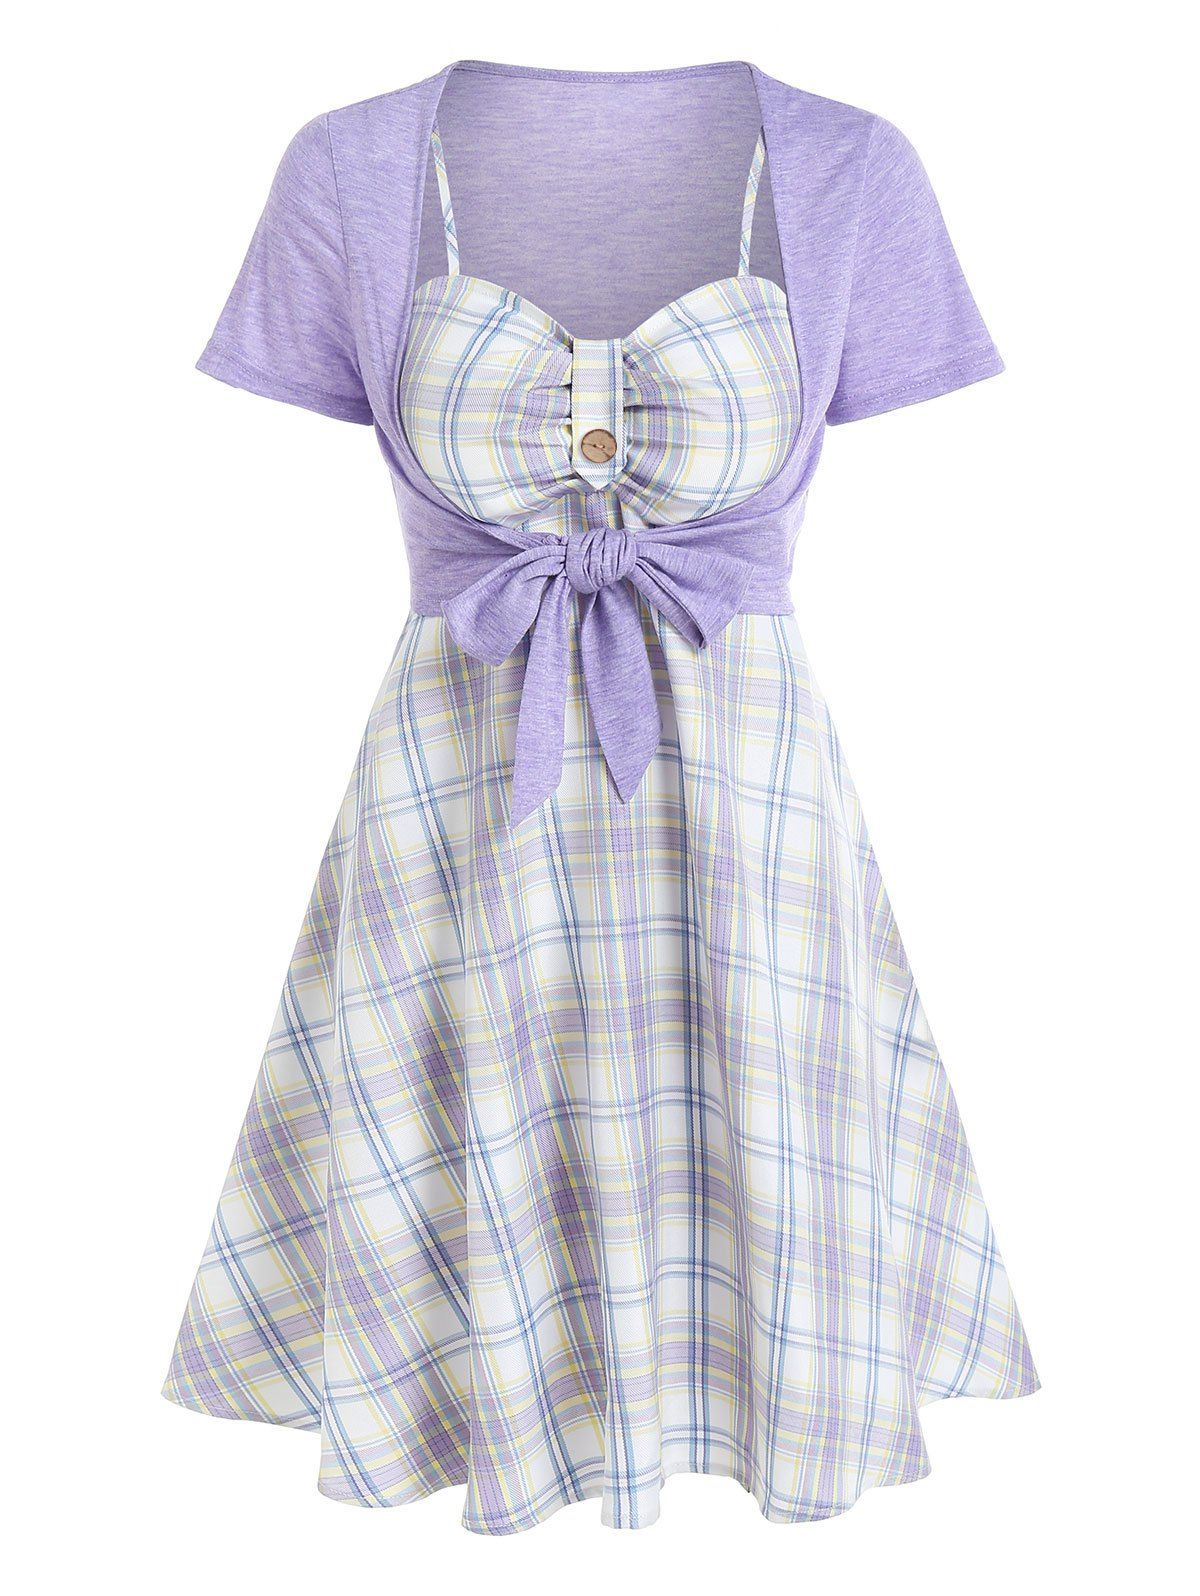 Plaid A Line Cami Dress and Open Bust Knot Top Twinset - LIGHT PURPLE XXL